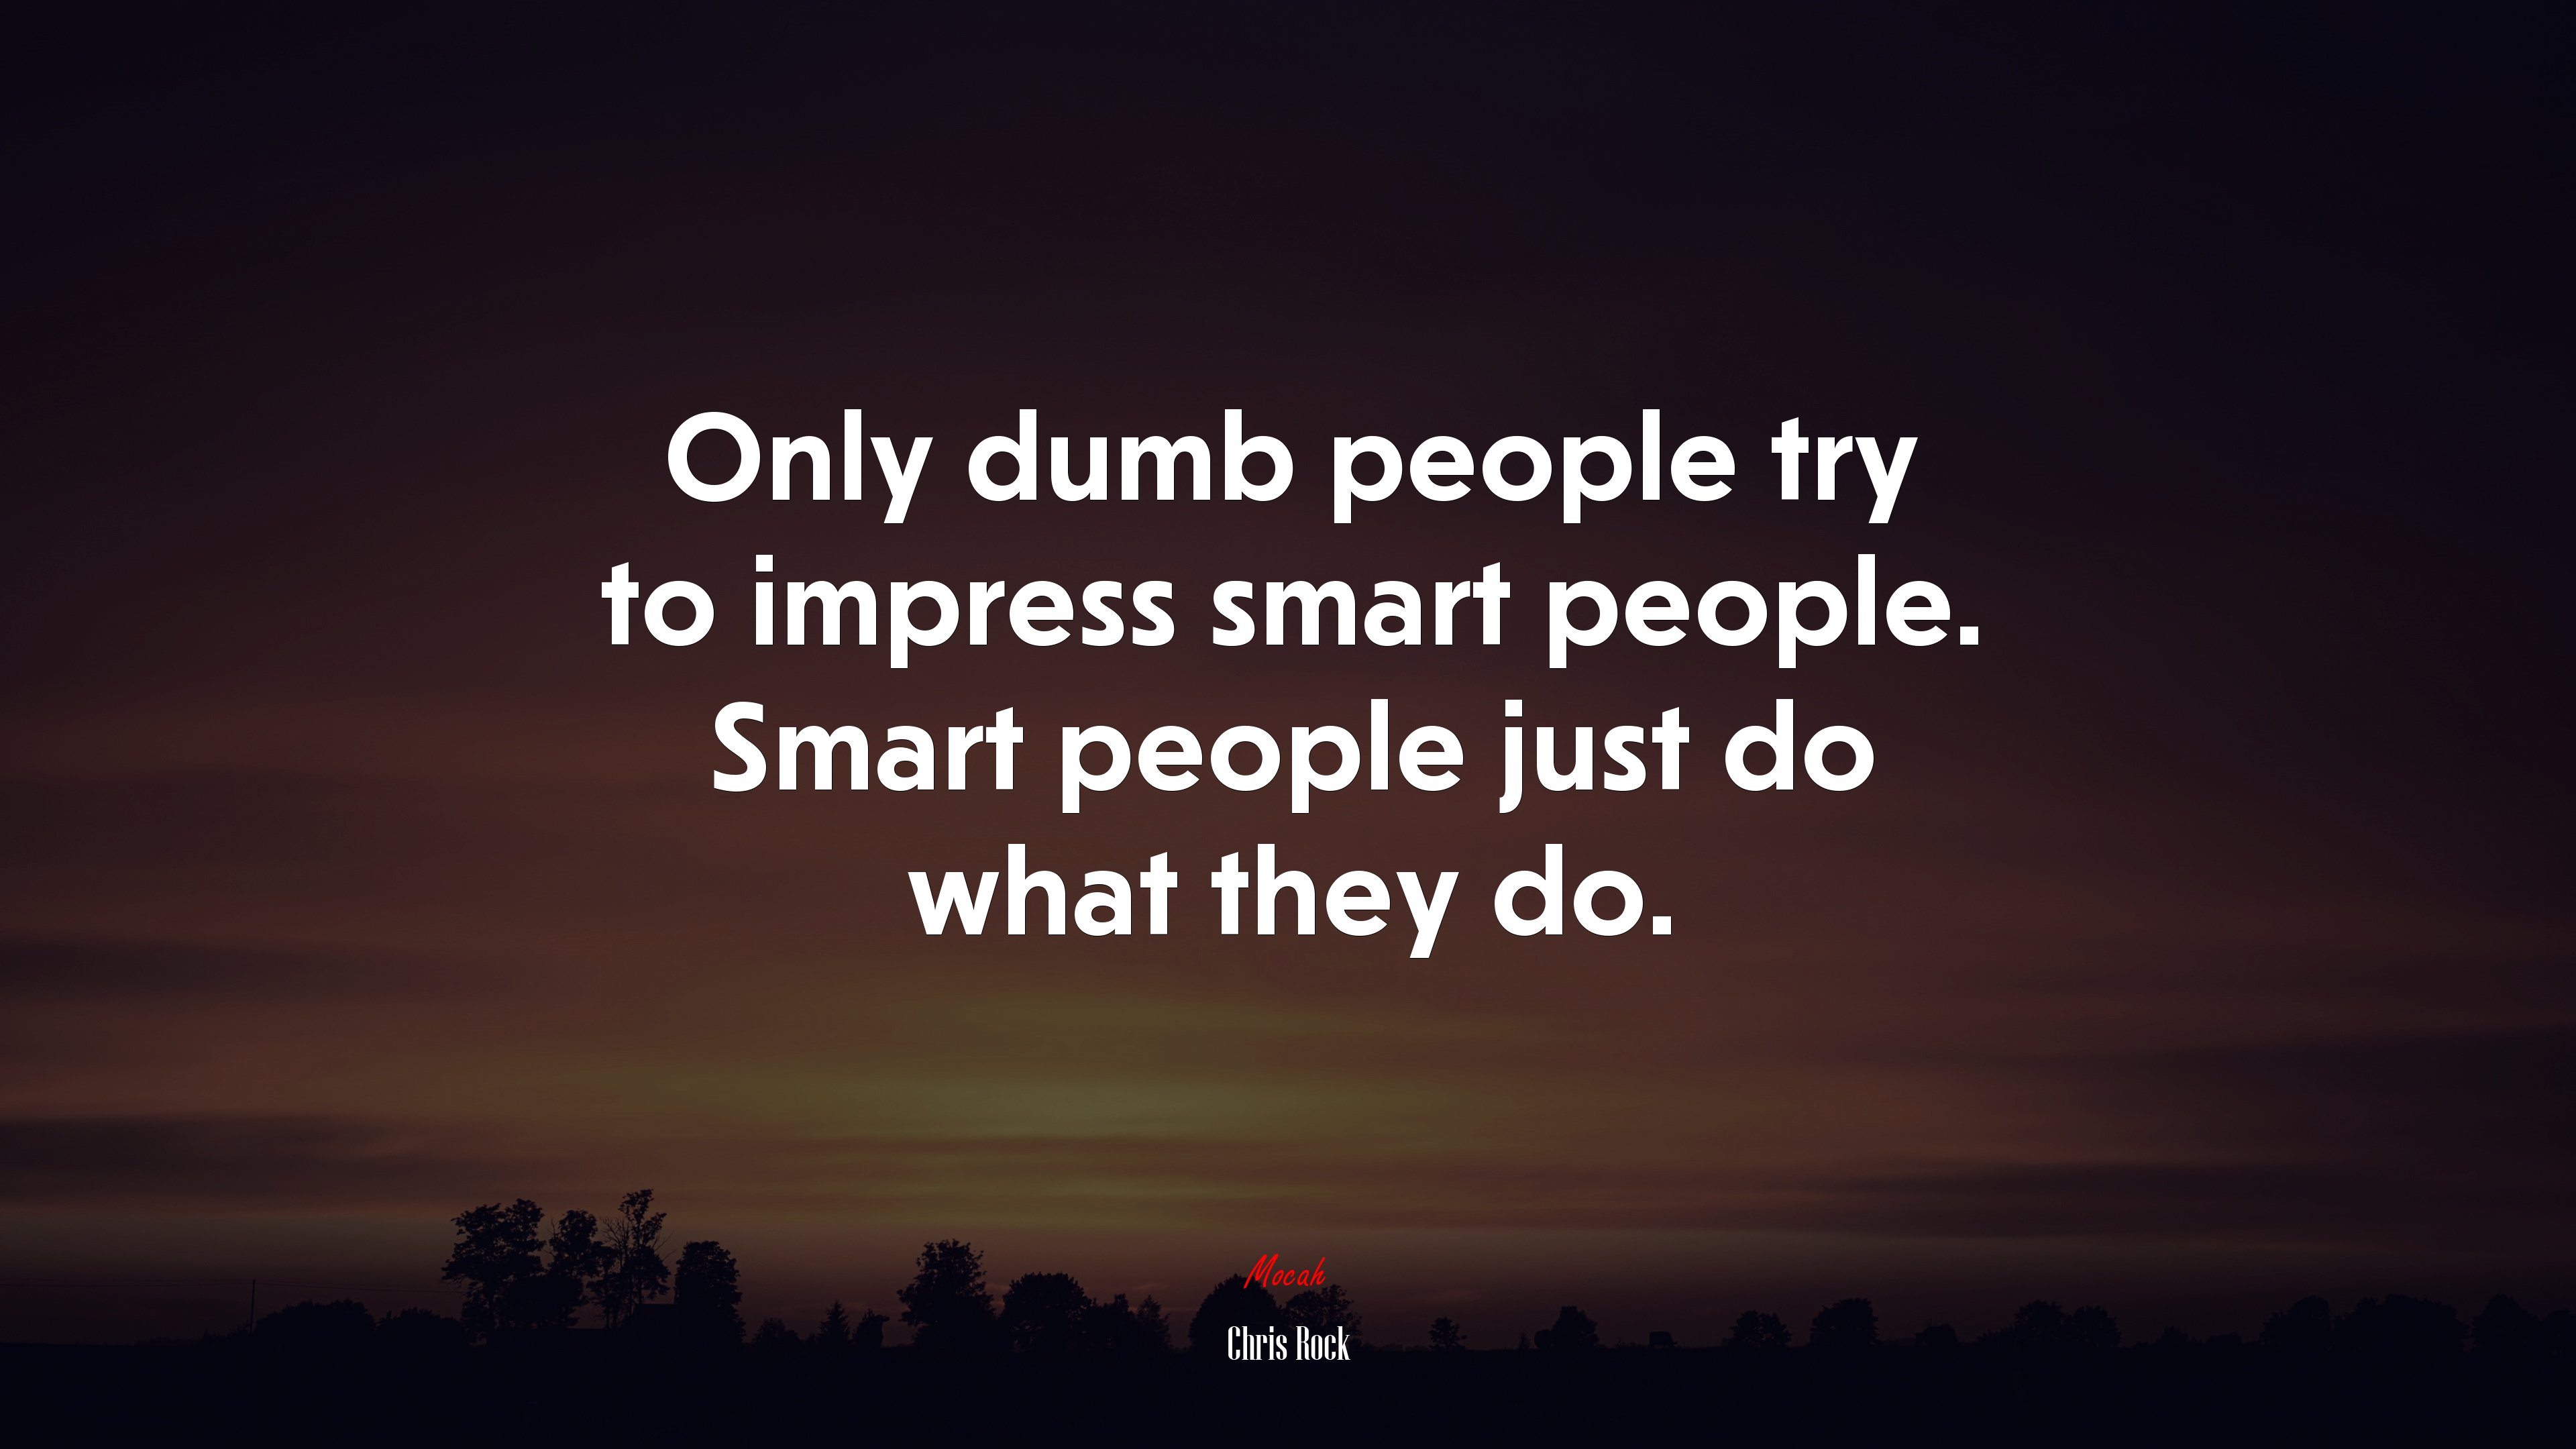 Only dumb people try to impress smart people. Smart people just do what they do. Chris Rock quote, 4k wallpaper HD Wallpaper